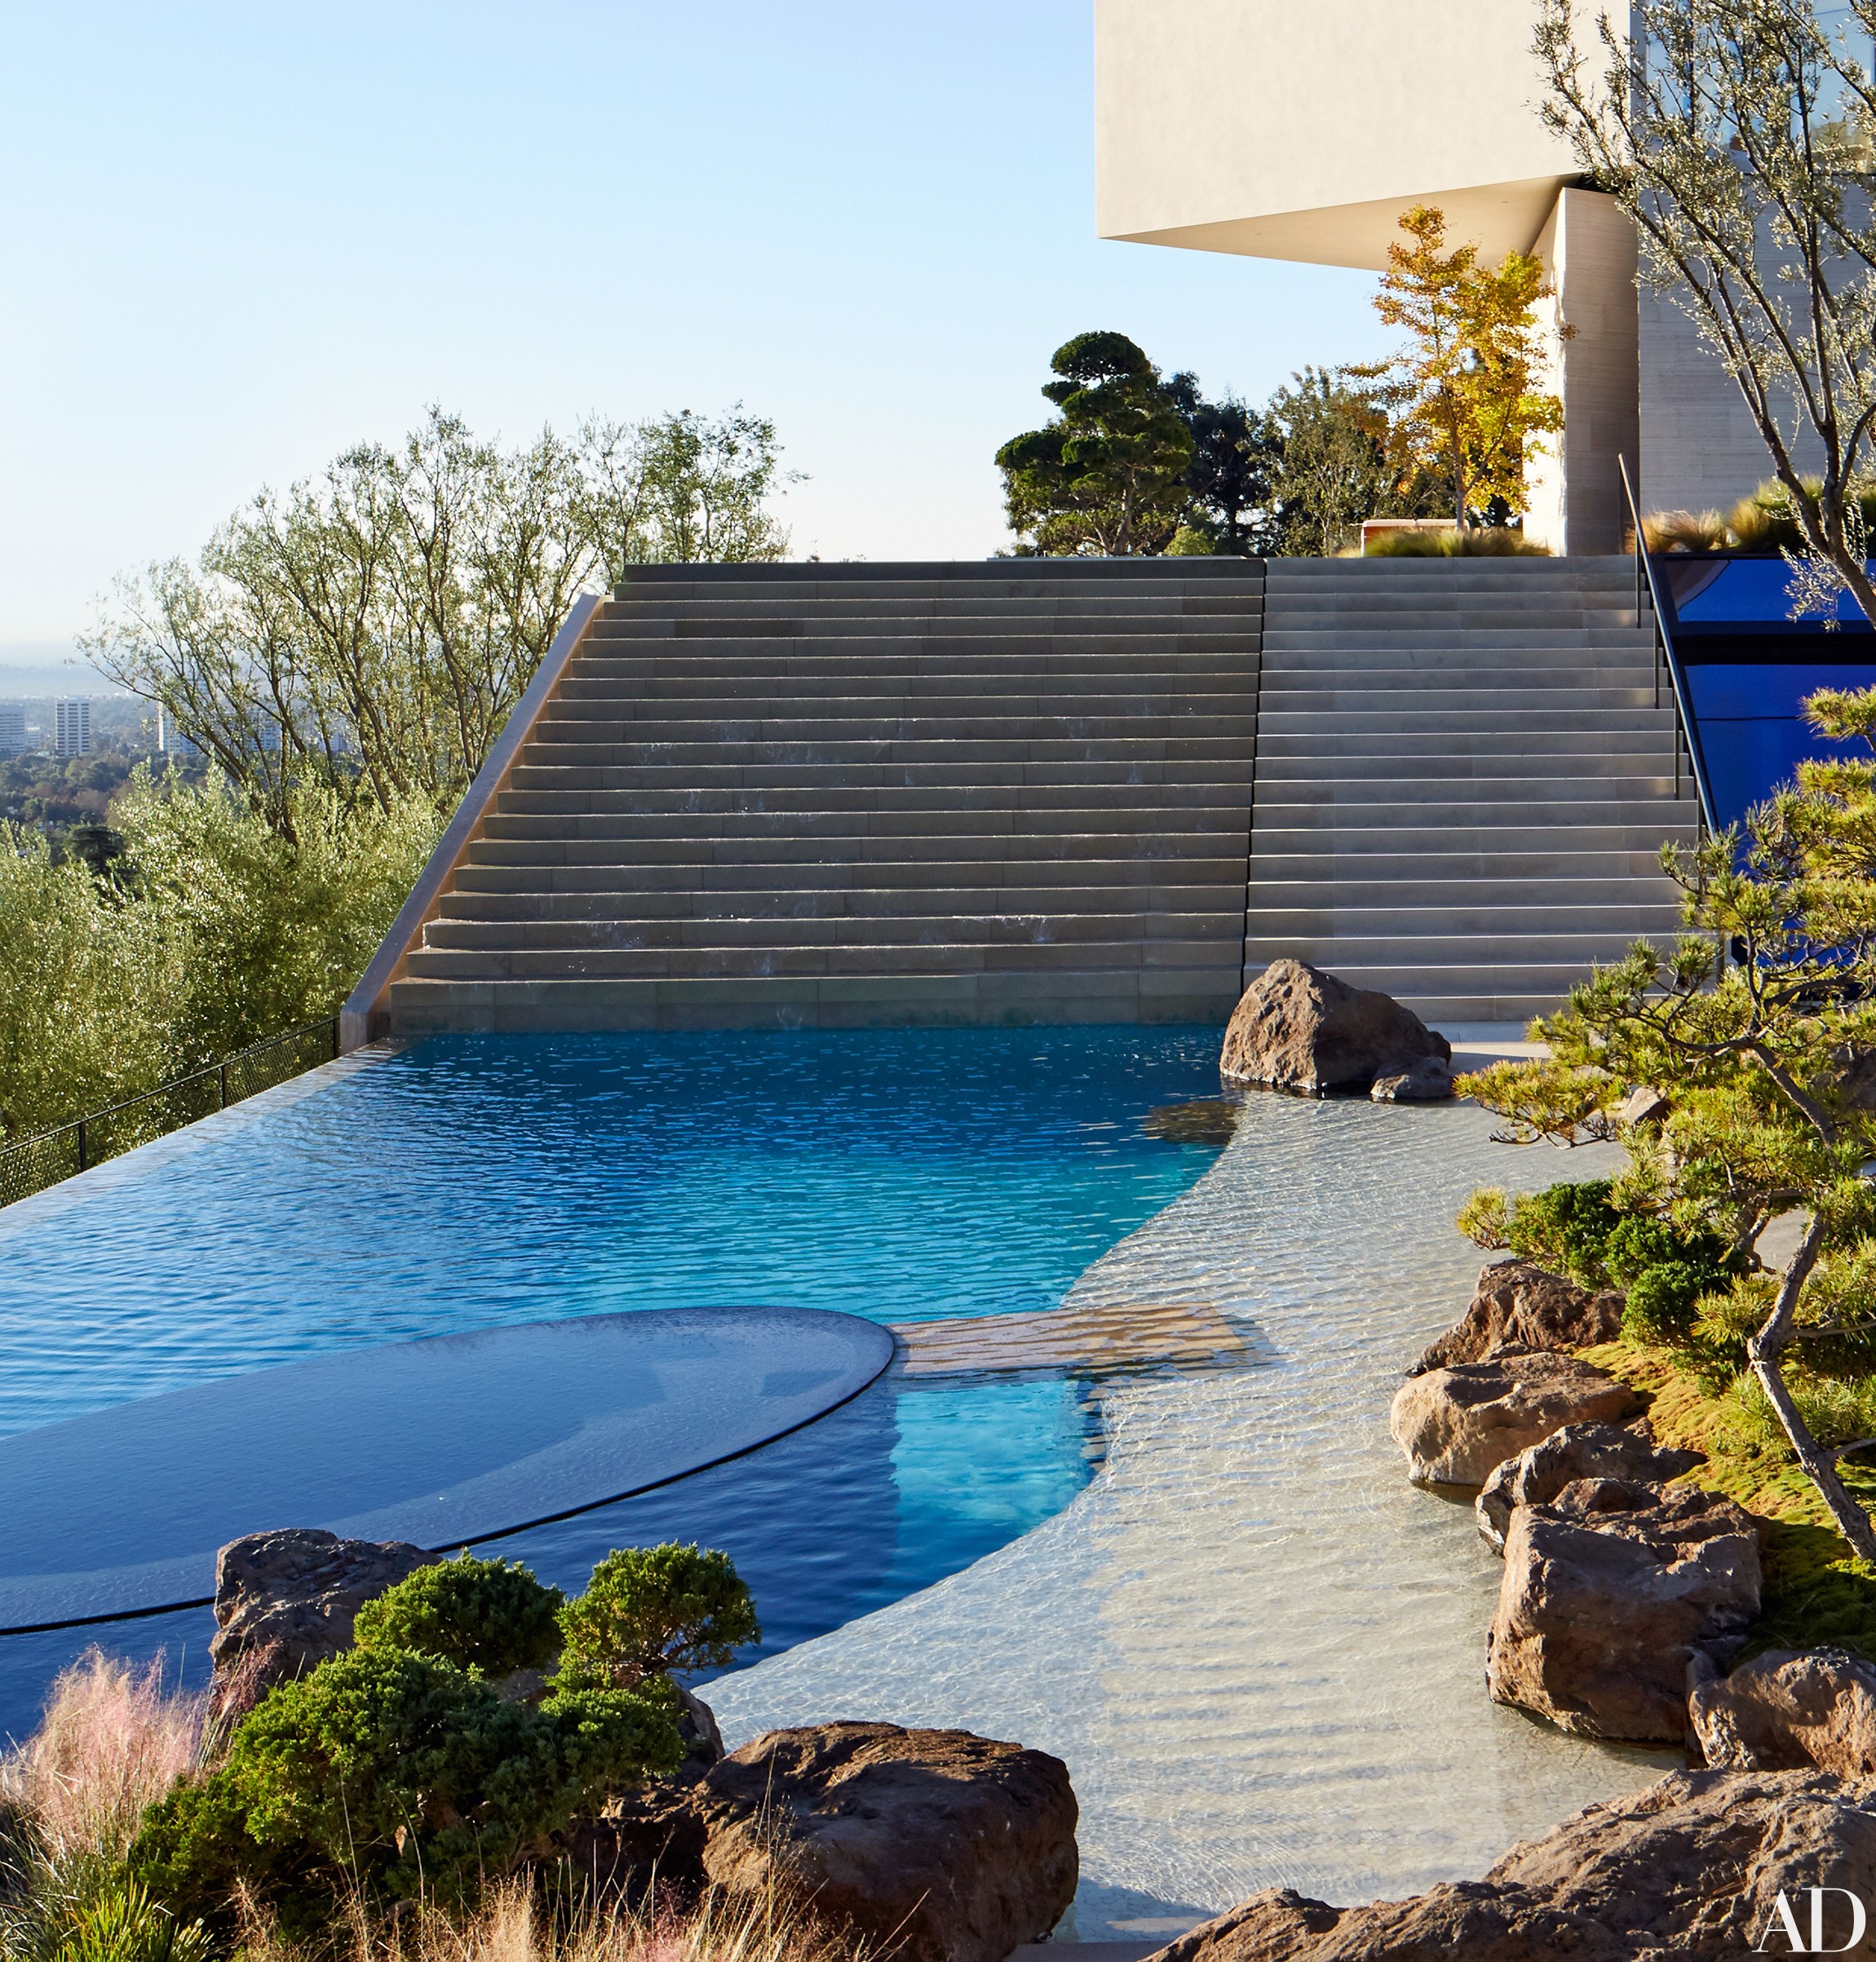 An integral part of its hillside setting, the infinity pool at filmmaker Michael Bay’s Los Angeles residence was designed by architect Chad Oppenheim and executed by the firm Rios Clementi Hale Studios; it features an oval inset hot tub.